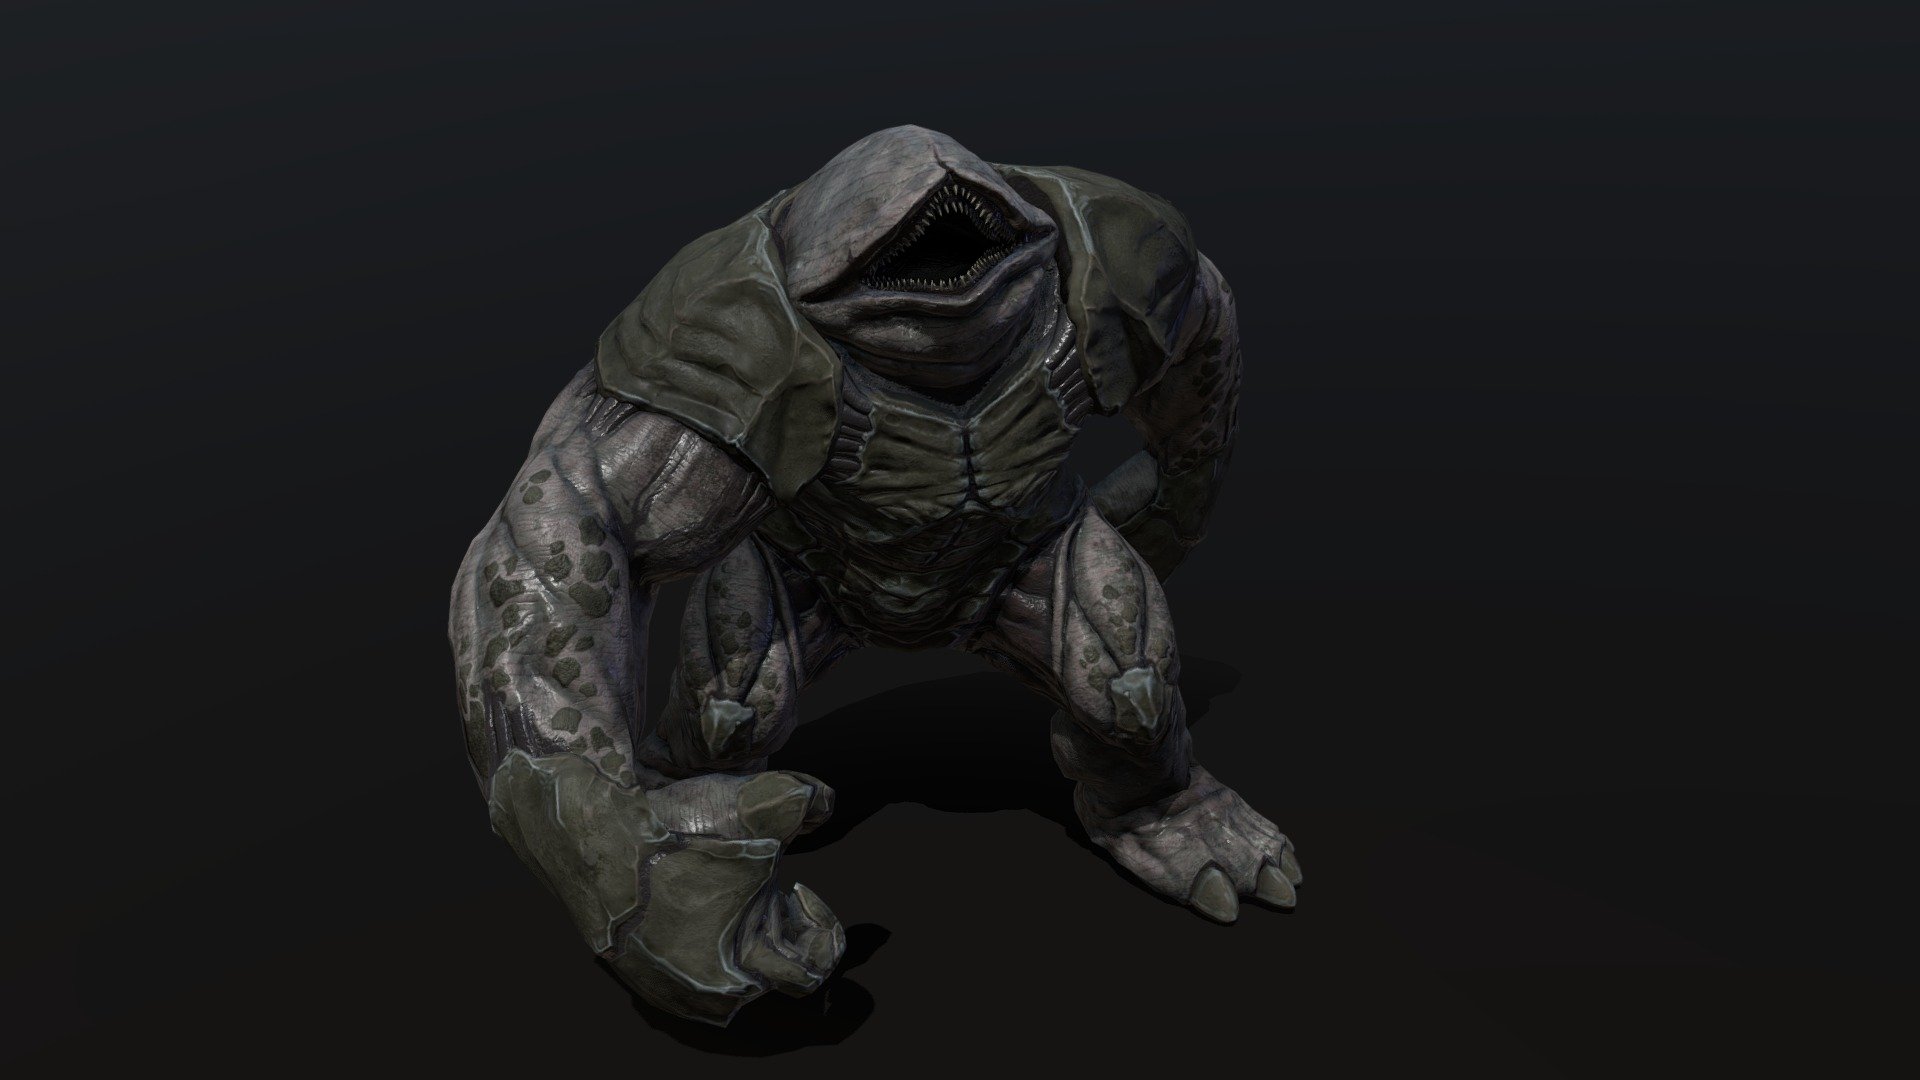 Another mutant I created for the indie developer Halcyon Winds. Programs used: Blender, Marmoset, Substance Painter 3d model